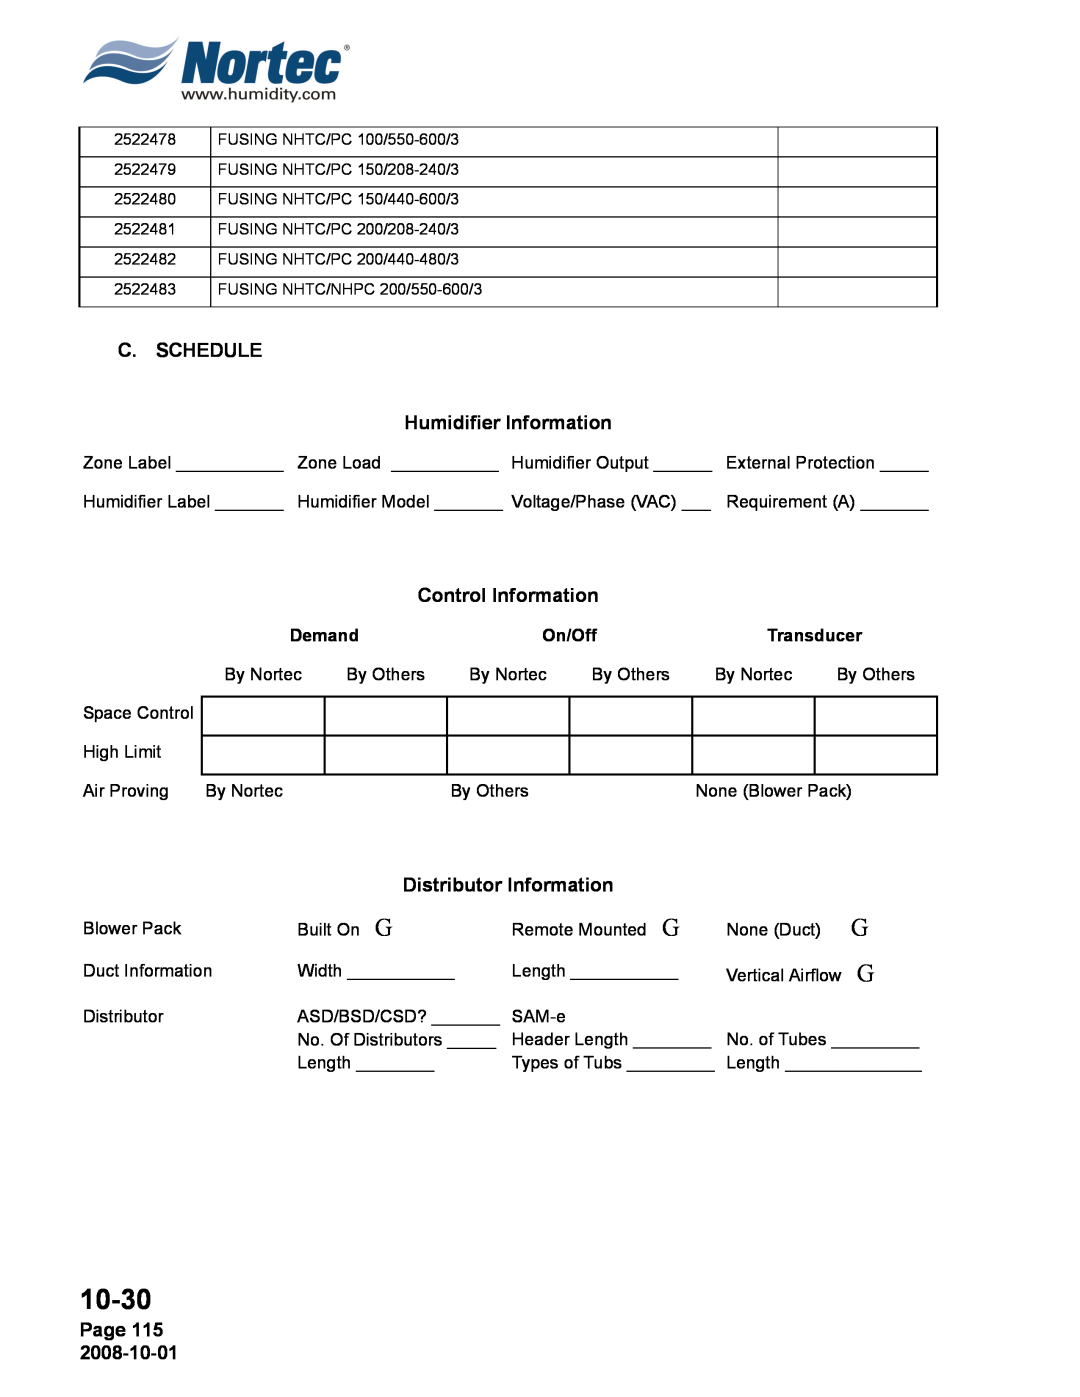 Nortec NHTC, NHPC manual 10-30, C. SCHEDULE Humidifier Information, Control Information, Distributor Information, Page 115 